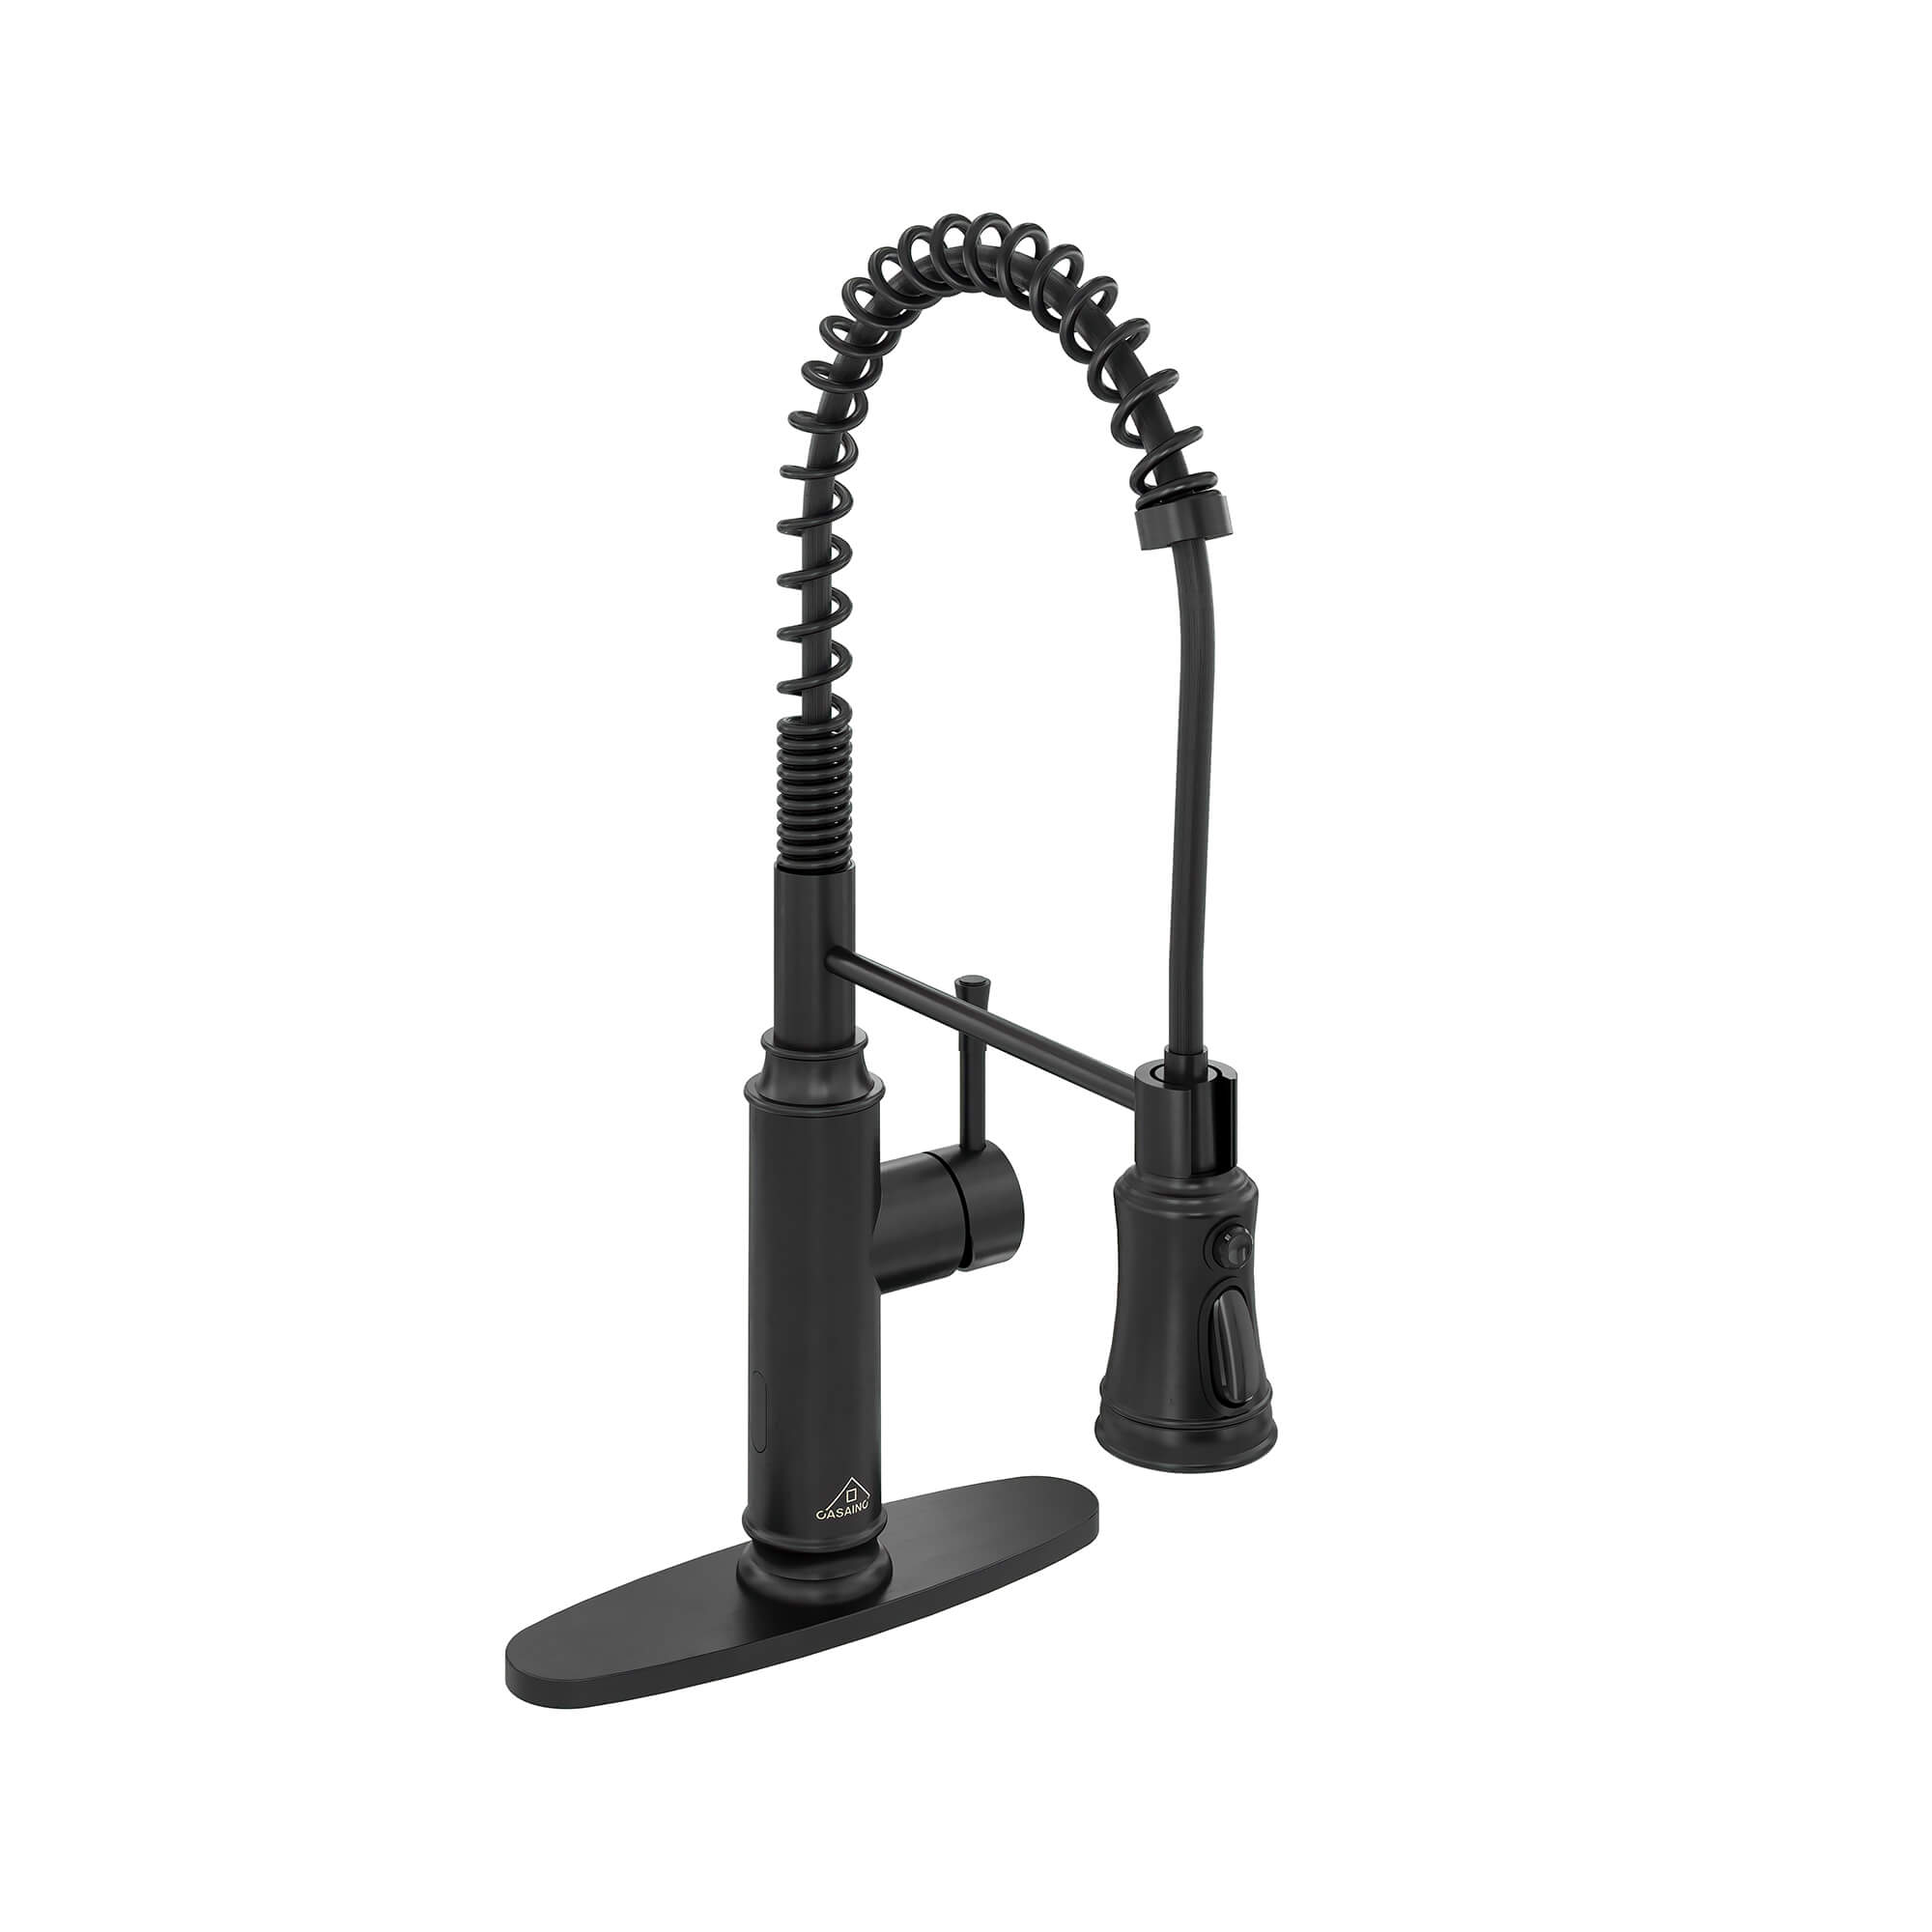 CASAINC pull down kitchen faucet with 1.8gpm spray head function switch in mattle black/brushed nickel-CASAINC